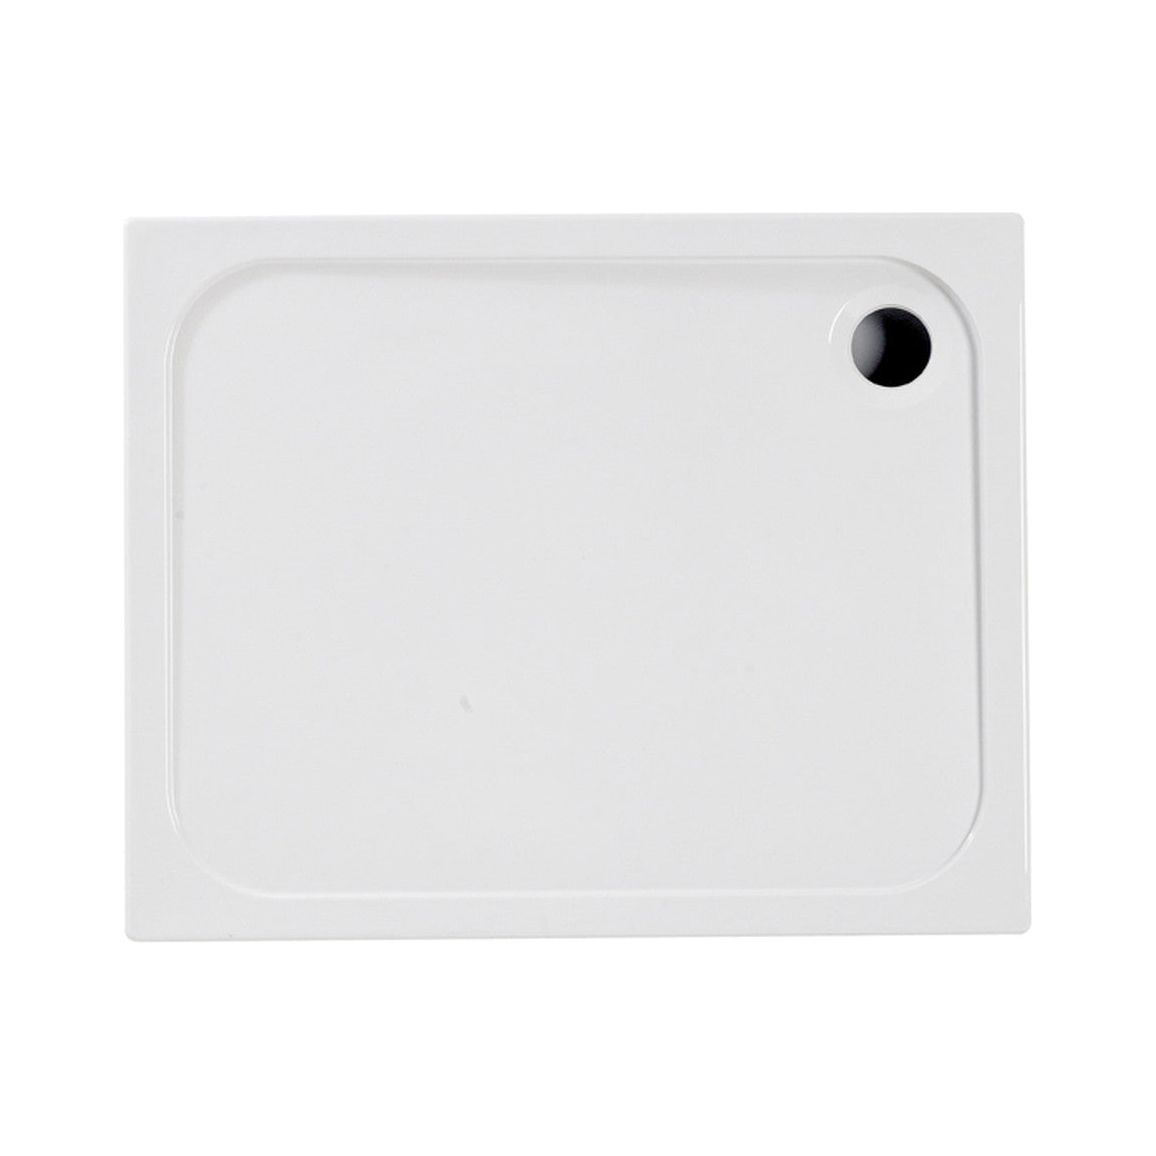 45mm Low Profile 1200x760mm Rectangular Tray & Waste